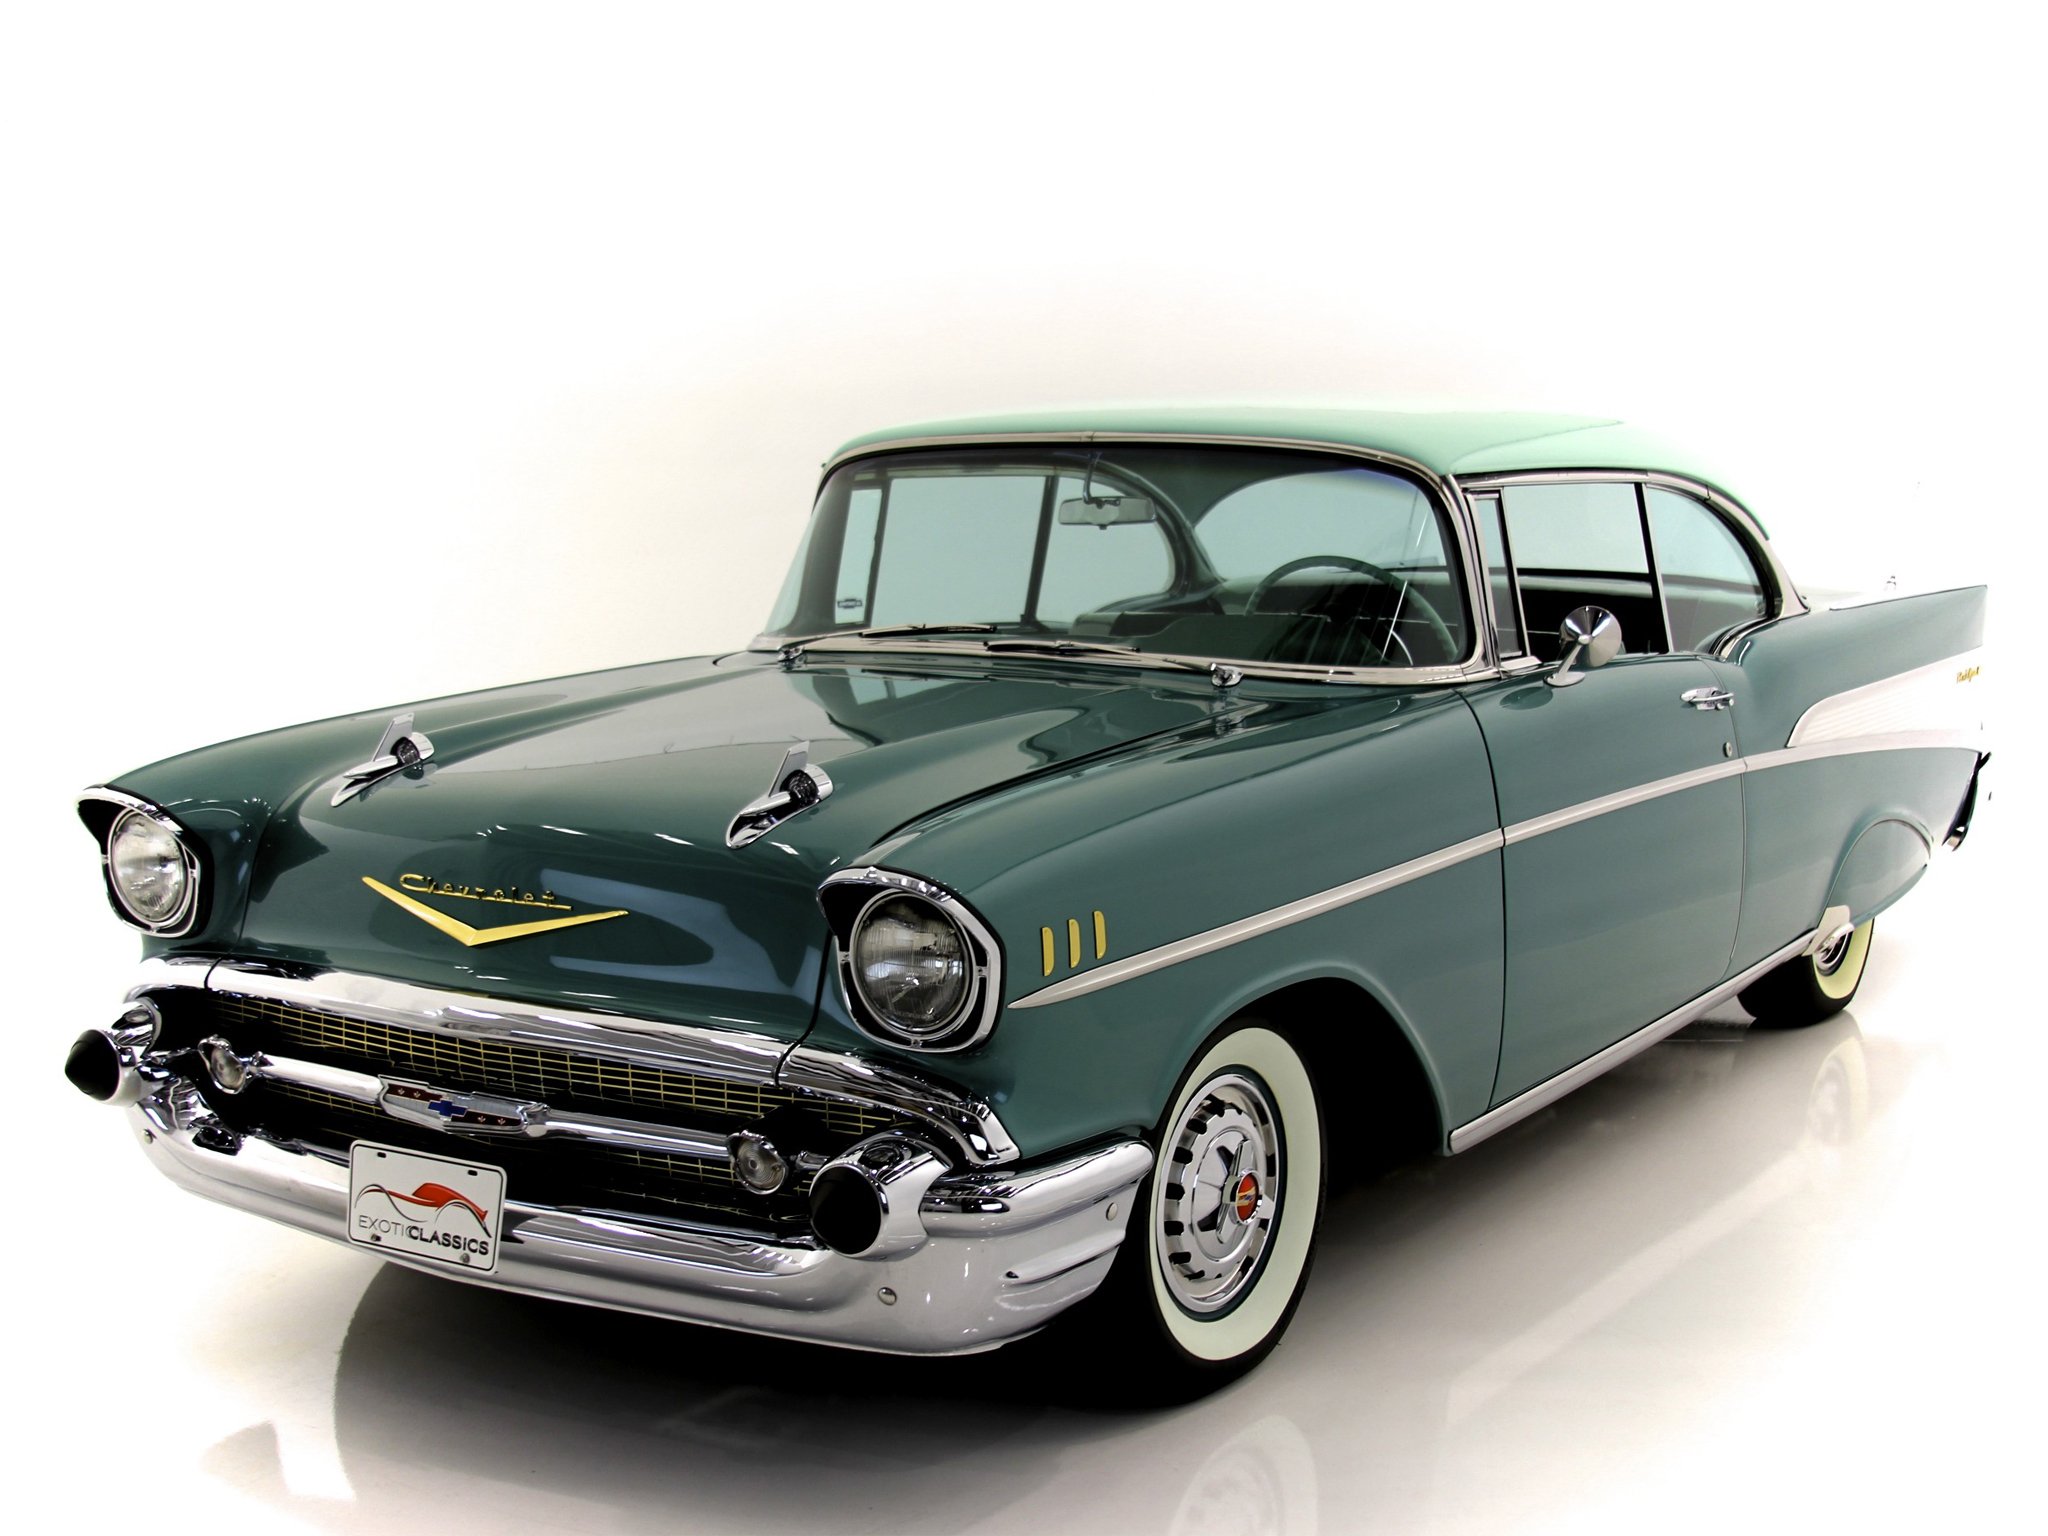 Pictures of 1957 chevy